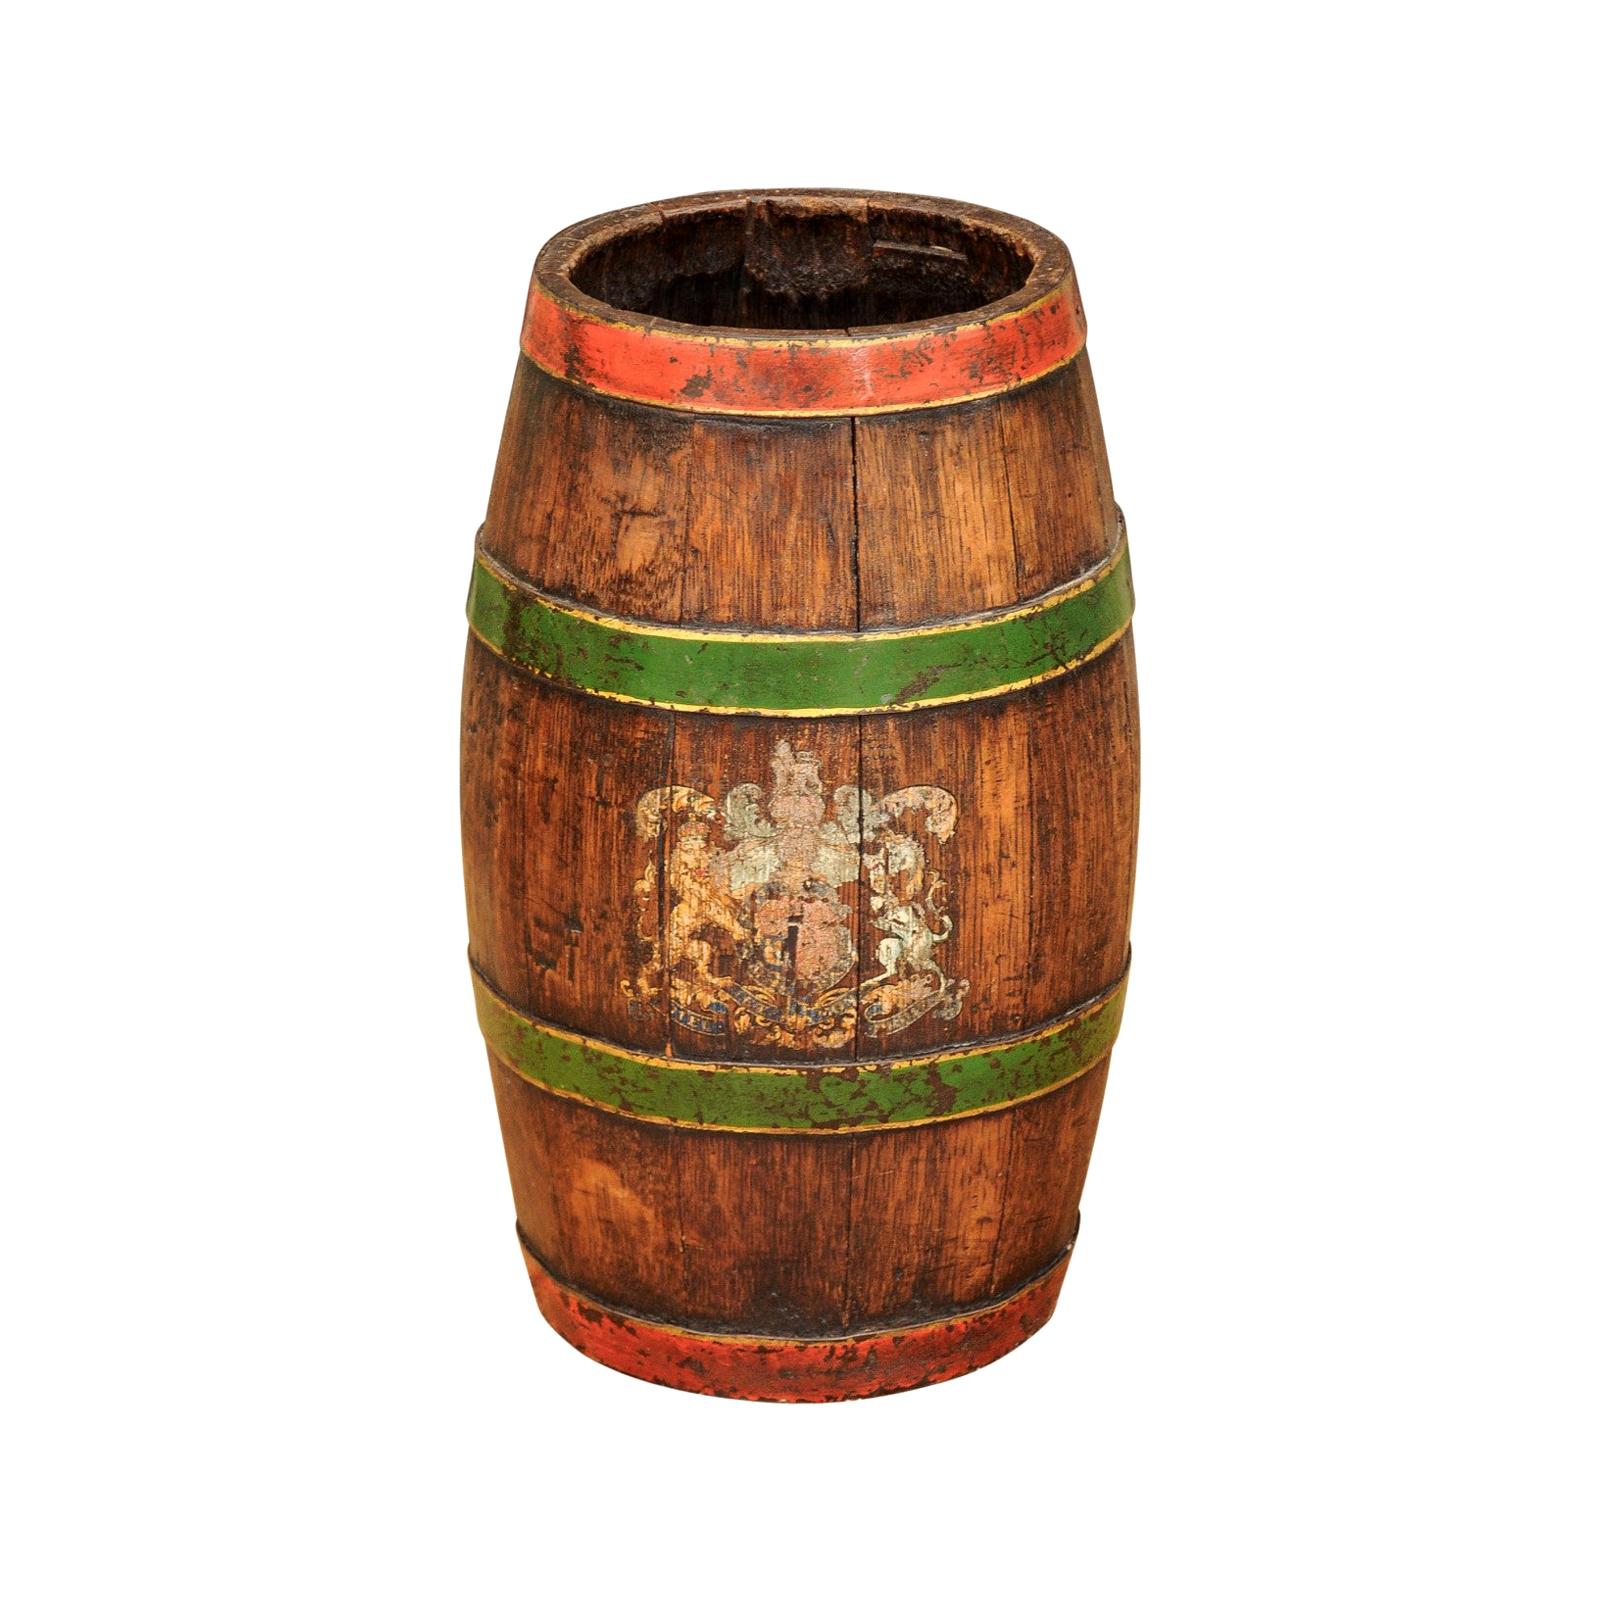 Petite 1900s Rustic English Edwardian Wooden Barrel with Green and Red Accents